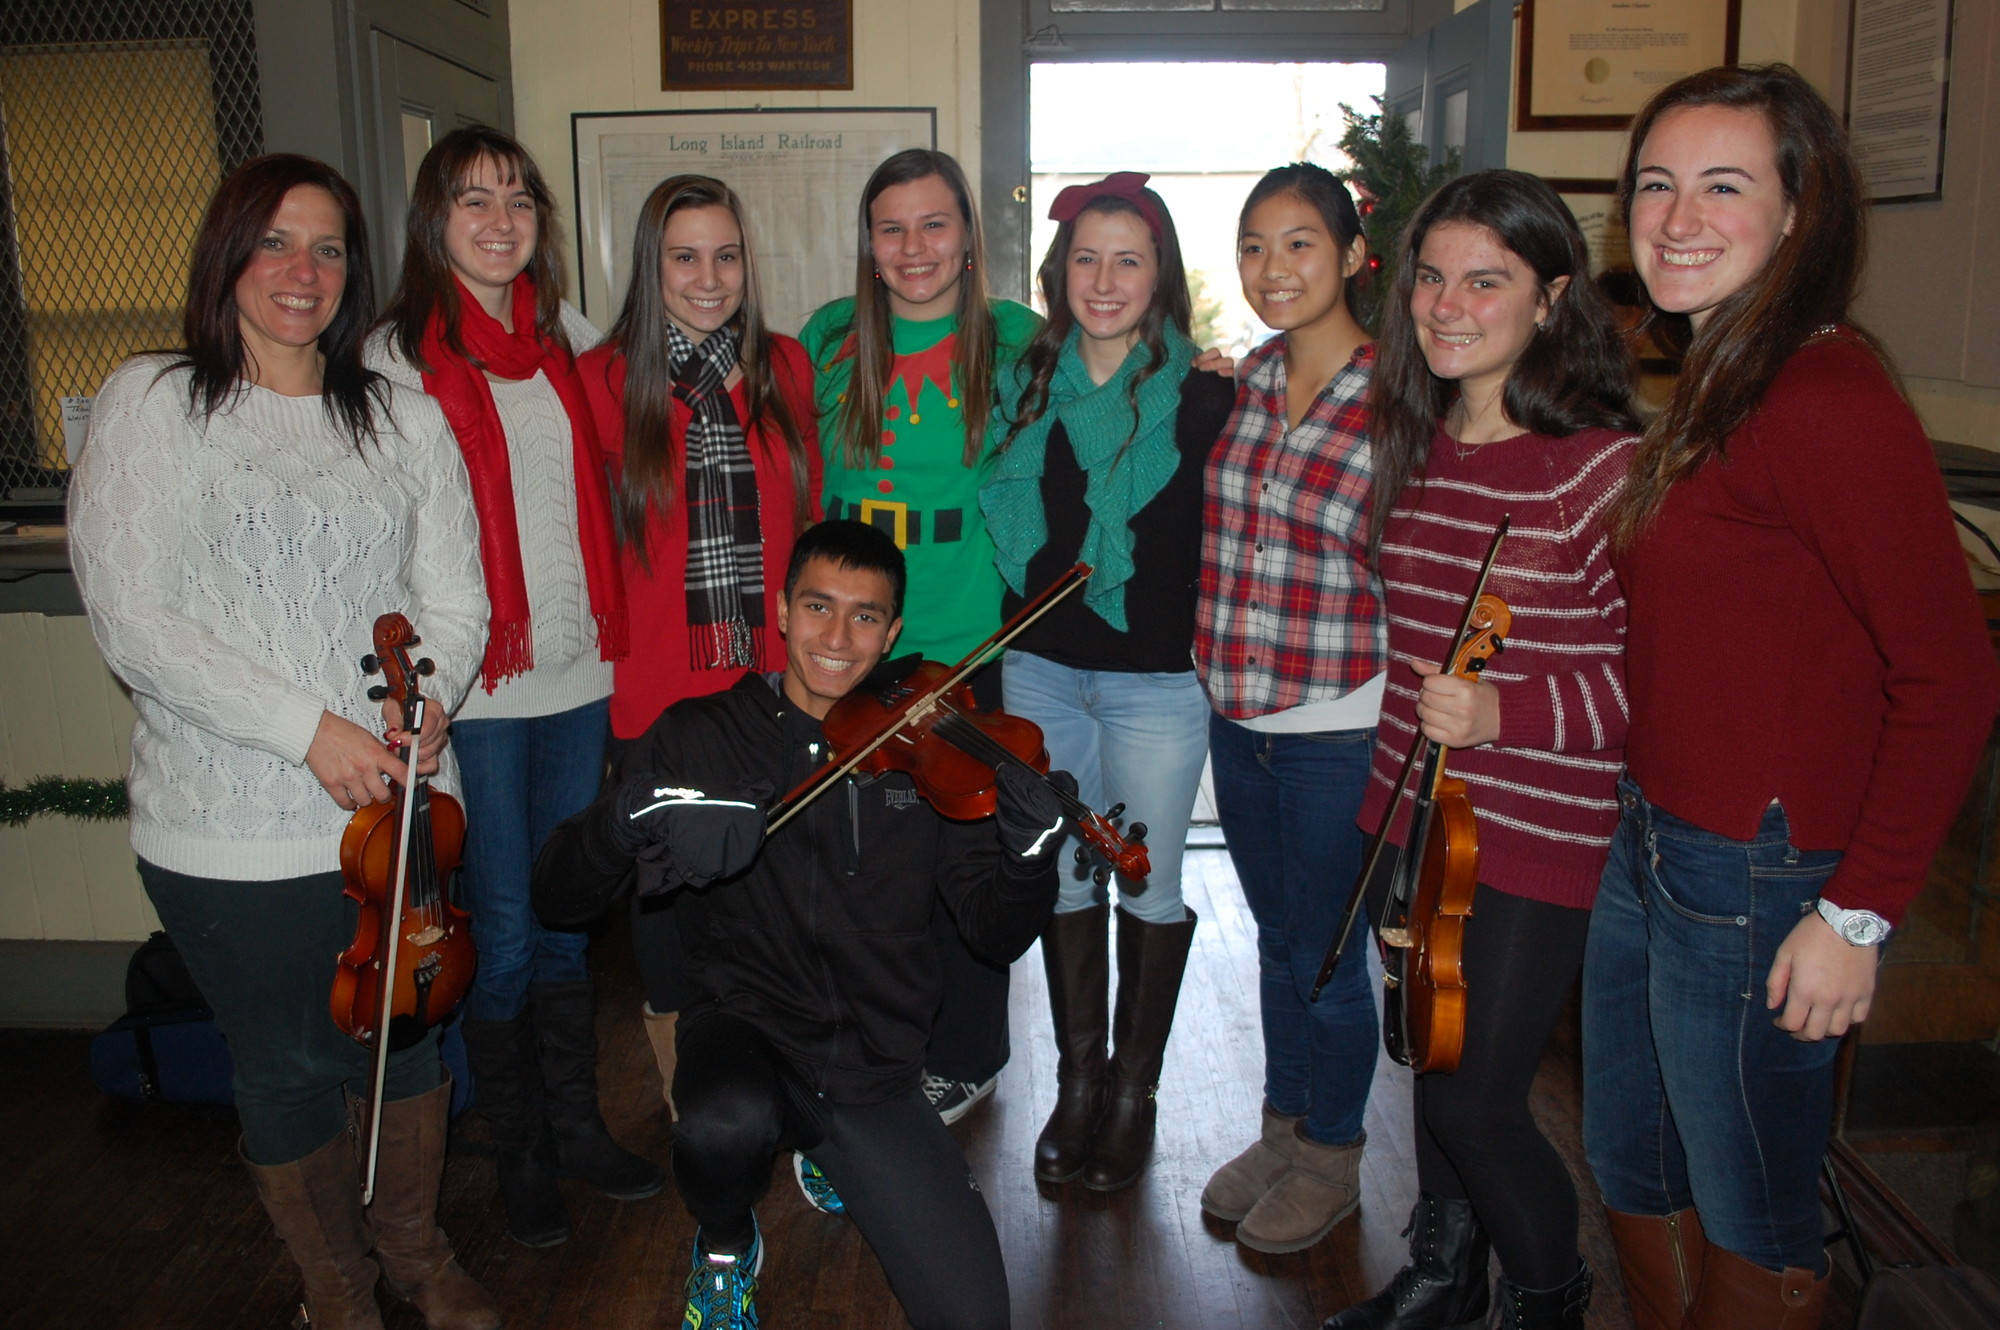 Wantagh High School orchestra students were among the day’s entertainers.